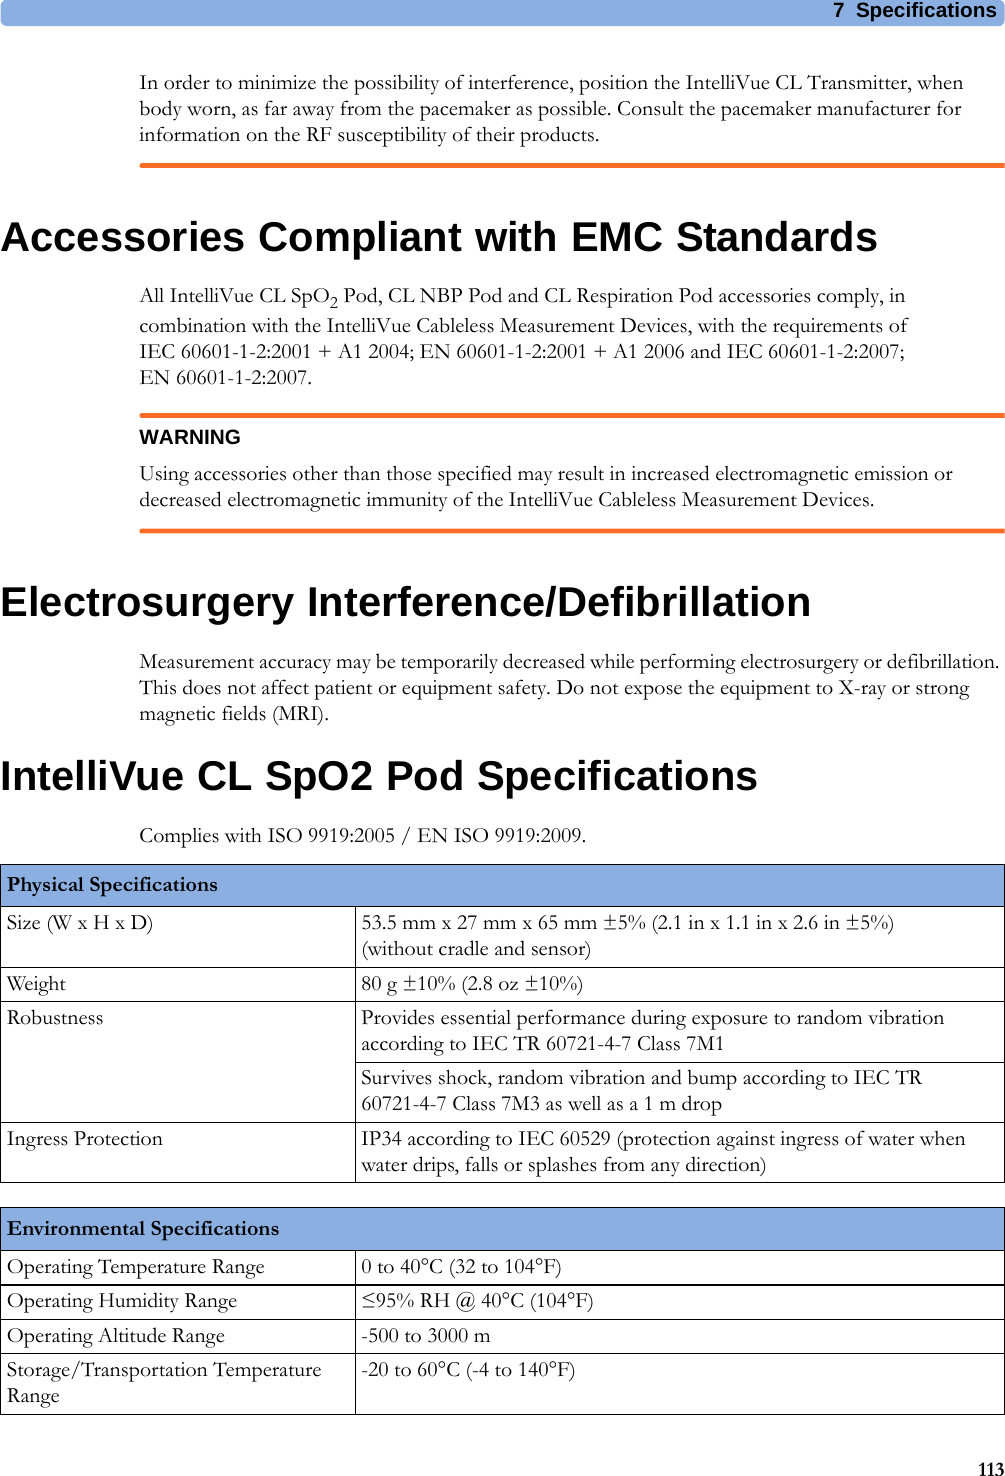 7 Specifications113In order to minimize the possibility of interference, position the IntelliVue CL Transmitter, when body worn, as far away from the pacemaker as possible. Consult the pacemaker manufacturer for information on the RF susceptibility of their products.Accessories Compliant with EMC StandardsAll IntelliVue CL SpO2 Pod, CL NBP Pod and CL Respiration Pod accessories comply, in combination with the IntelliVue Cableless Measurement Devices, with the requirements of IEC 60601-1-2:2001 + A1 2004; EN 60601-1-2:2001 + A1 2006 and IEC 60601-1-2:2007; EN 60601-1-2:2007.WARNINGUsing accessories other than those specified may result in increased electromagnetic emission or decreased electromagnetic immunity of the IntelliVue Cableless Measurement Devices.Electrosurgery Interference/DefibrillationMeasurement accuracy may be temporarily decreased while performing electrosurgery or defibrillation. This does not affect patient or equipment safety. Do not expose the equipment to X-ray or strong magnetic fields (MRI).IntelliVue CL SpO2 Pod SpecificationsComplies with ISO 9919:2005 / EN ISO 9919:2009.Physical SpecificationsSize (W x H x D) 53.5 mm x 27 mm x 65 mm ±5% (2.1 in x 1.1 in x 2.6 in ±5%)(without cradle and sensor)Weight 80 g ±10% (2.8 oz ±10%)Robustness Provides essential performance during exposure to random vibration according to IEC TR 60721-4-7 Class 7M1Survives shock, random vibration and bump according to IEC TR 60721-4-7 Class 7M3 as well as a 1 m dropIngress Protection IP34 according to IEC 60529 (protection against ingress of water when water drips, falls or splashes from any direction)Environmental SpecificationsOperating Temperature Range 0 to 40°C (32 to 104°F)Operating Humidity Range ≤95% RH @ 40°C (104°F)Operating Altitude Range -500 to 3000 mStorage/Transportation Temperature Range-20 to 60°C (-4 to 140°F)